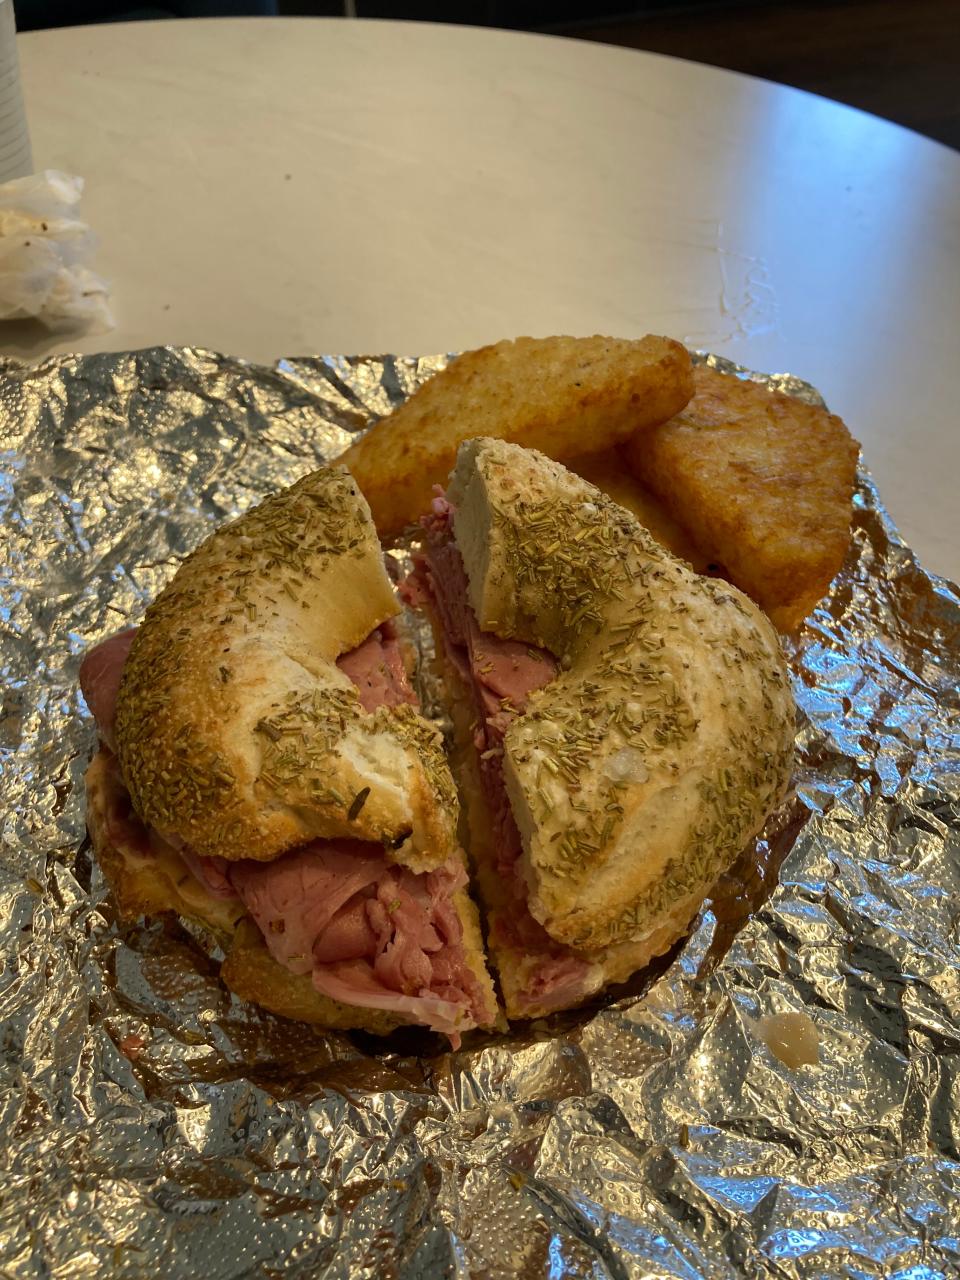 The Rueben on a rosemary sea salt bagel with a side of hash browns from Cleveland Bagel Café in Kent.